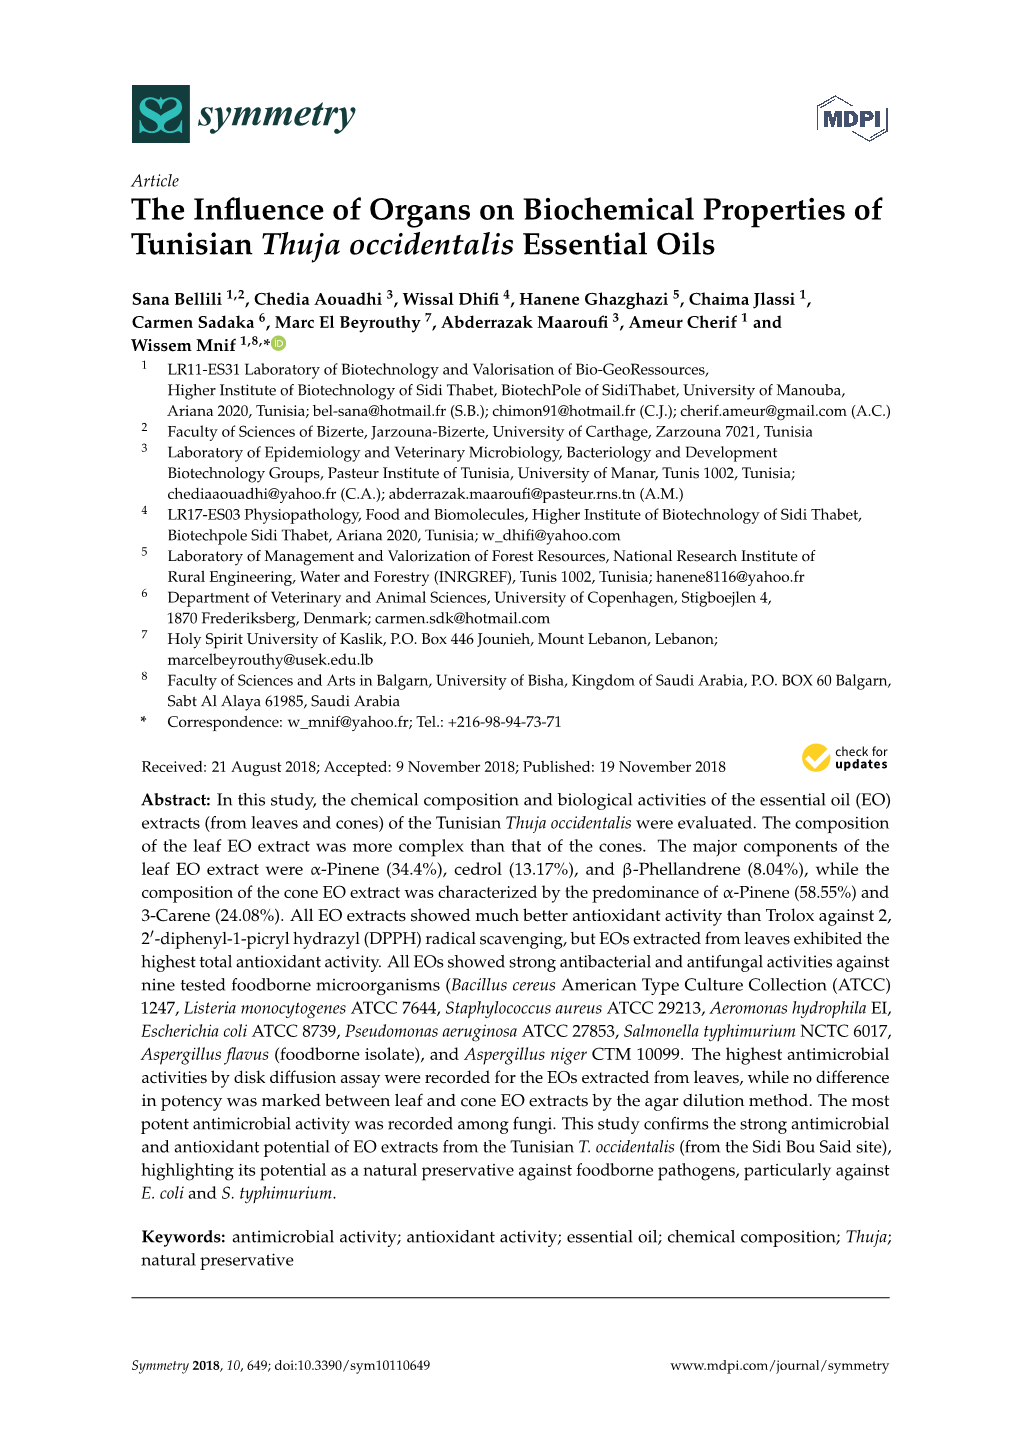 The Influence of Organs on Biochemical Properties of Tunisian